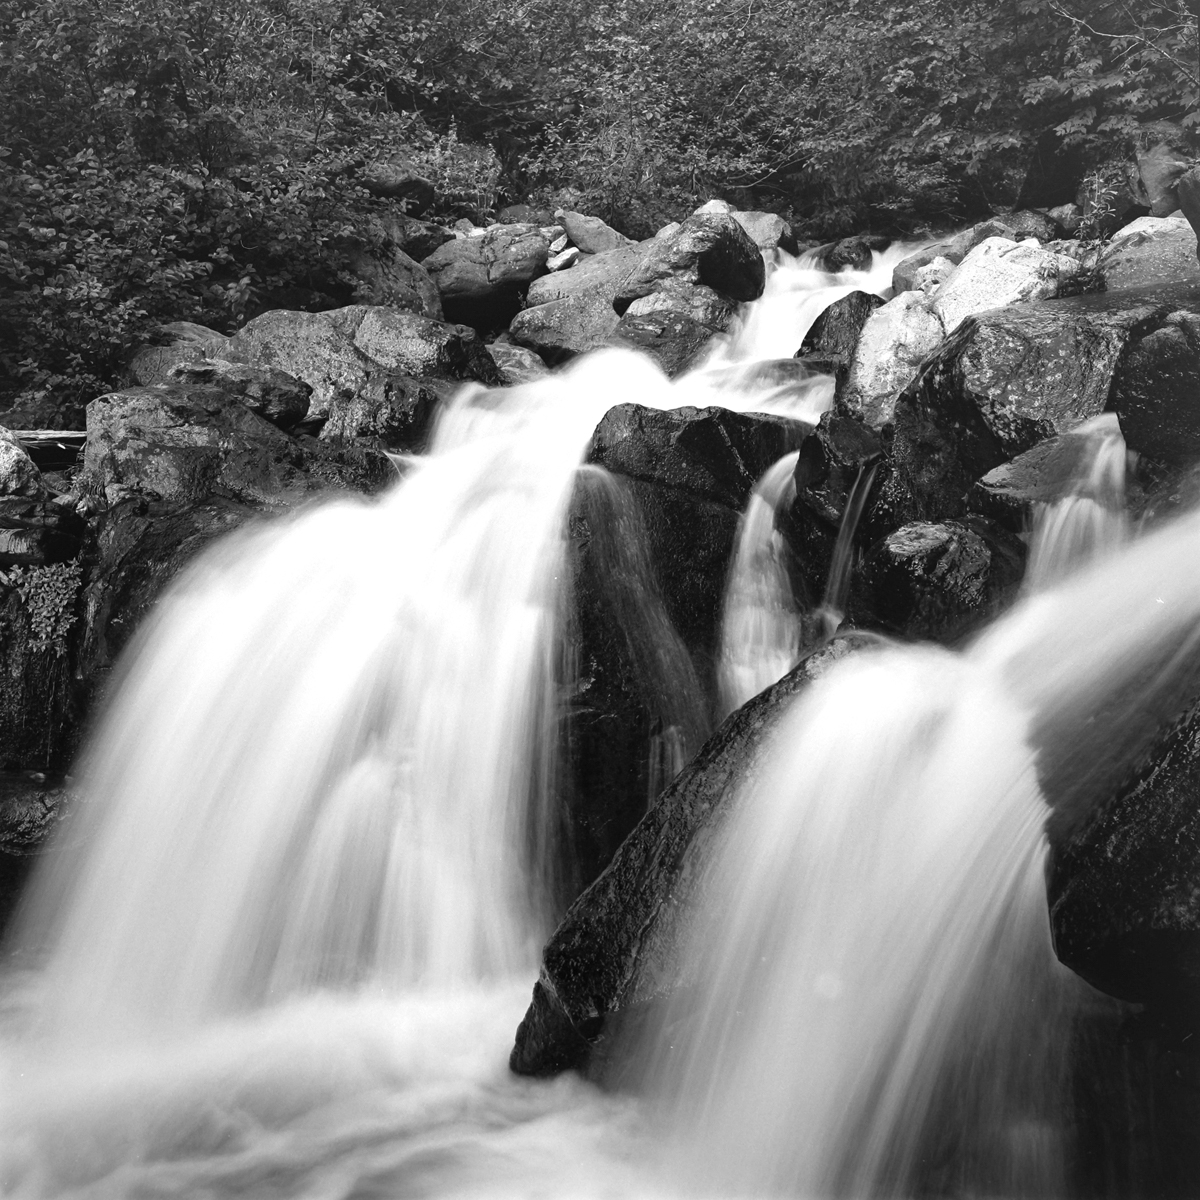 Long exposure black and white photo of a waterfall